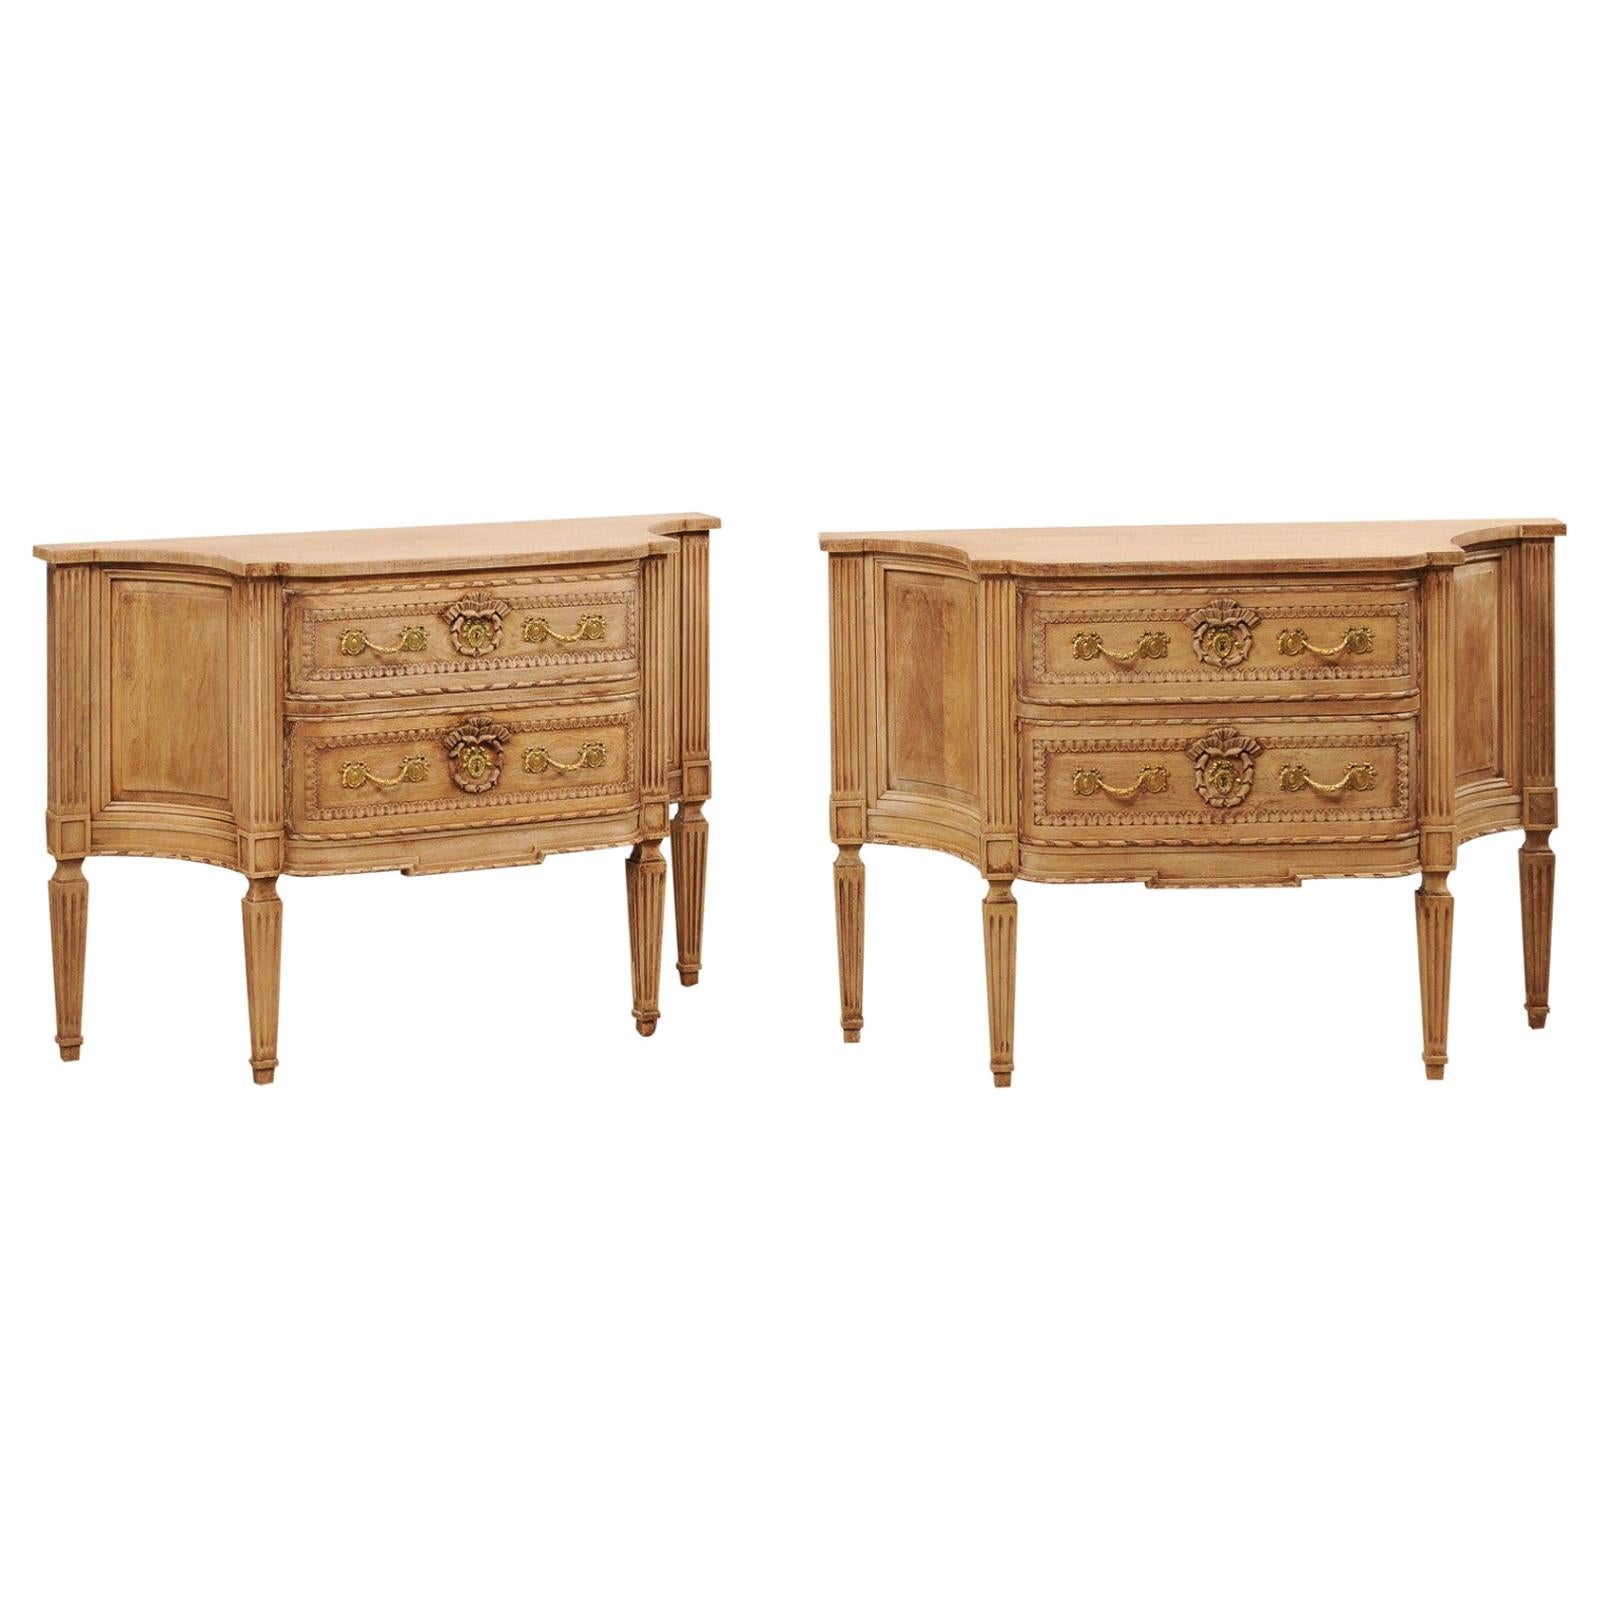 Italian Pair of Two-Drawer Raised Console Chests, Neoclassical Style Carvings